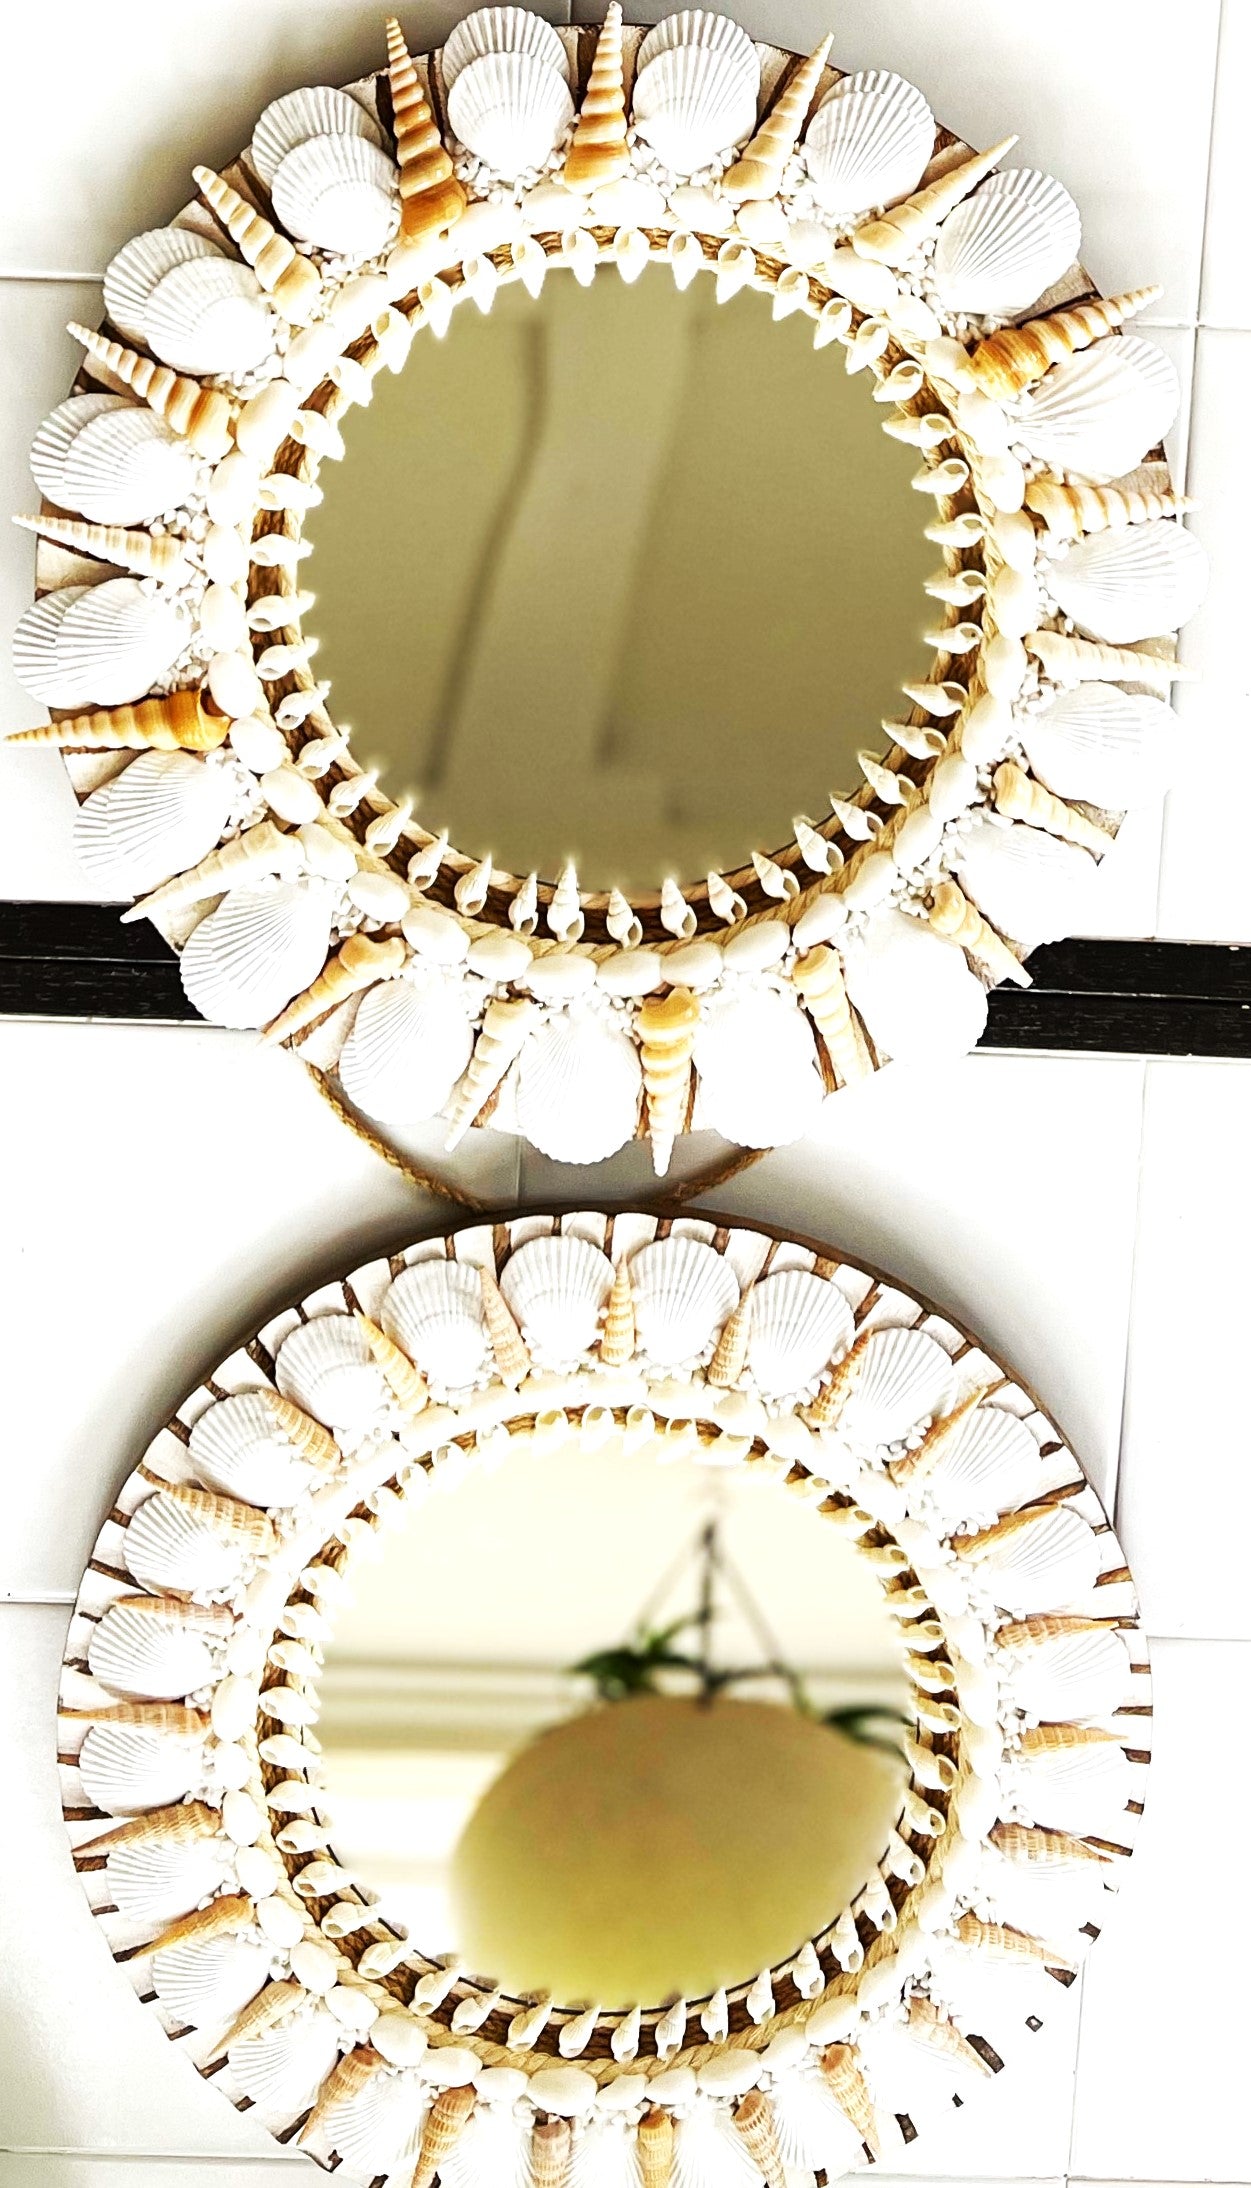 Seashell Mirror, Set of 3- 14 Inch Round With 8 " Mirror